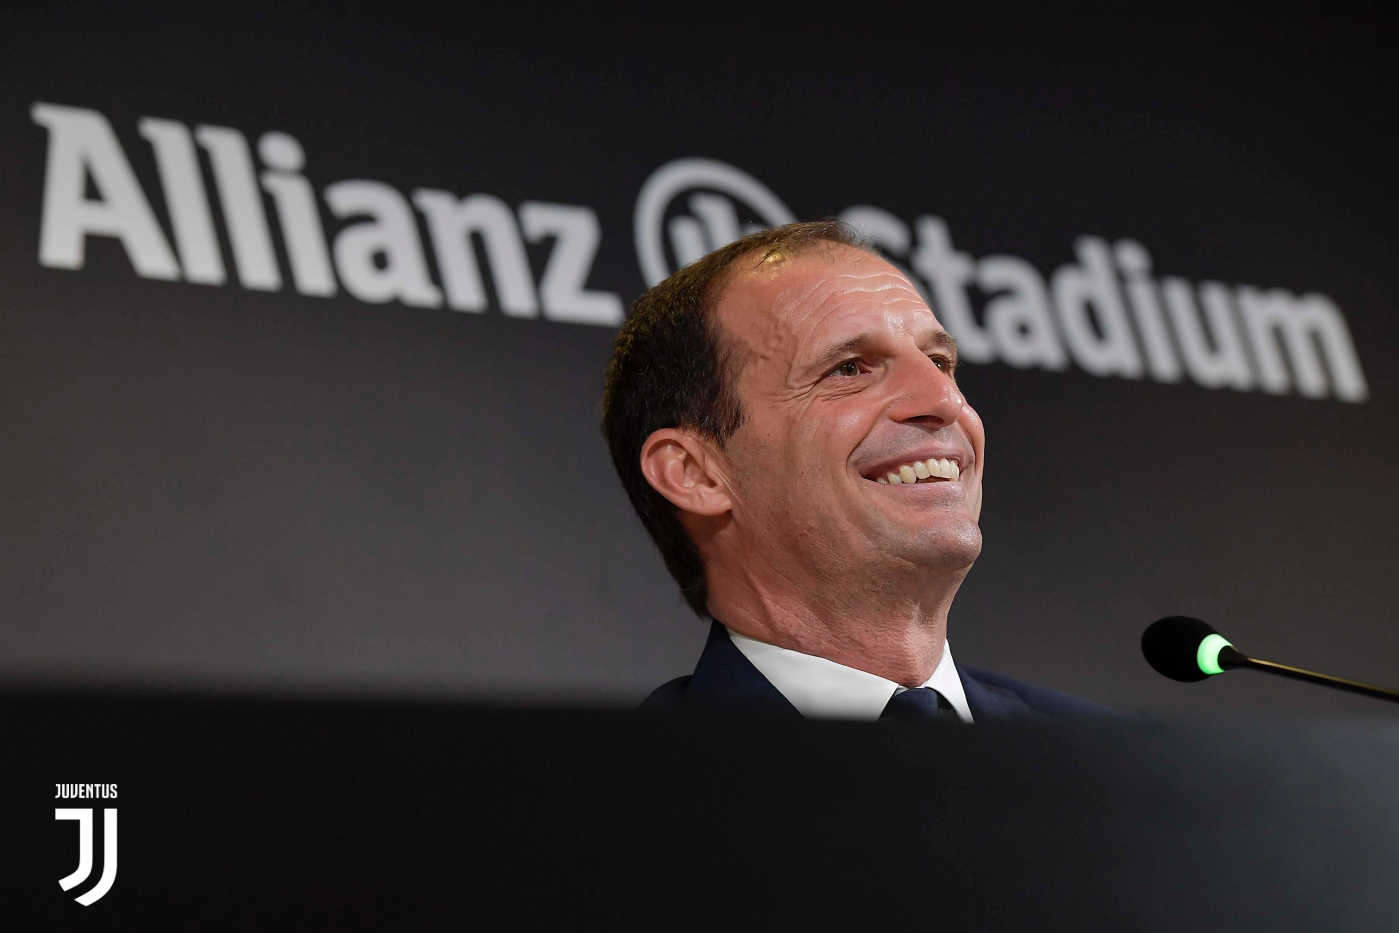  Allegri reveals the names of three players who will start against Genoa